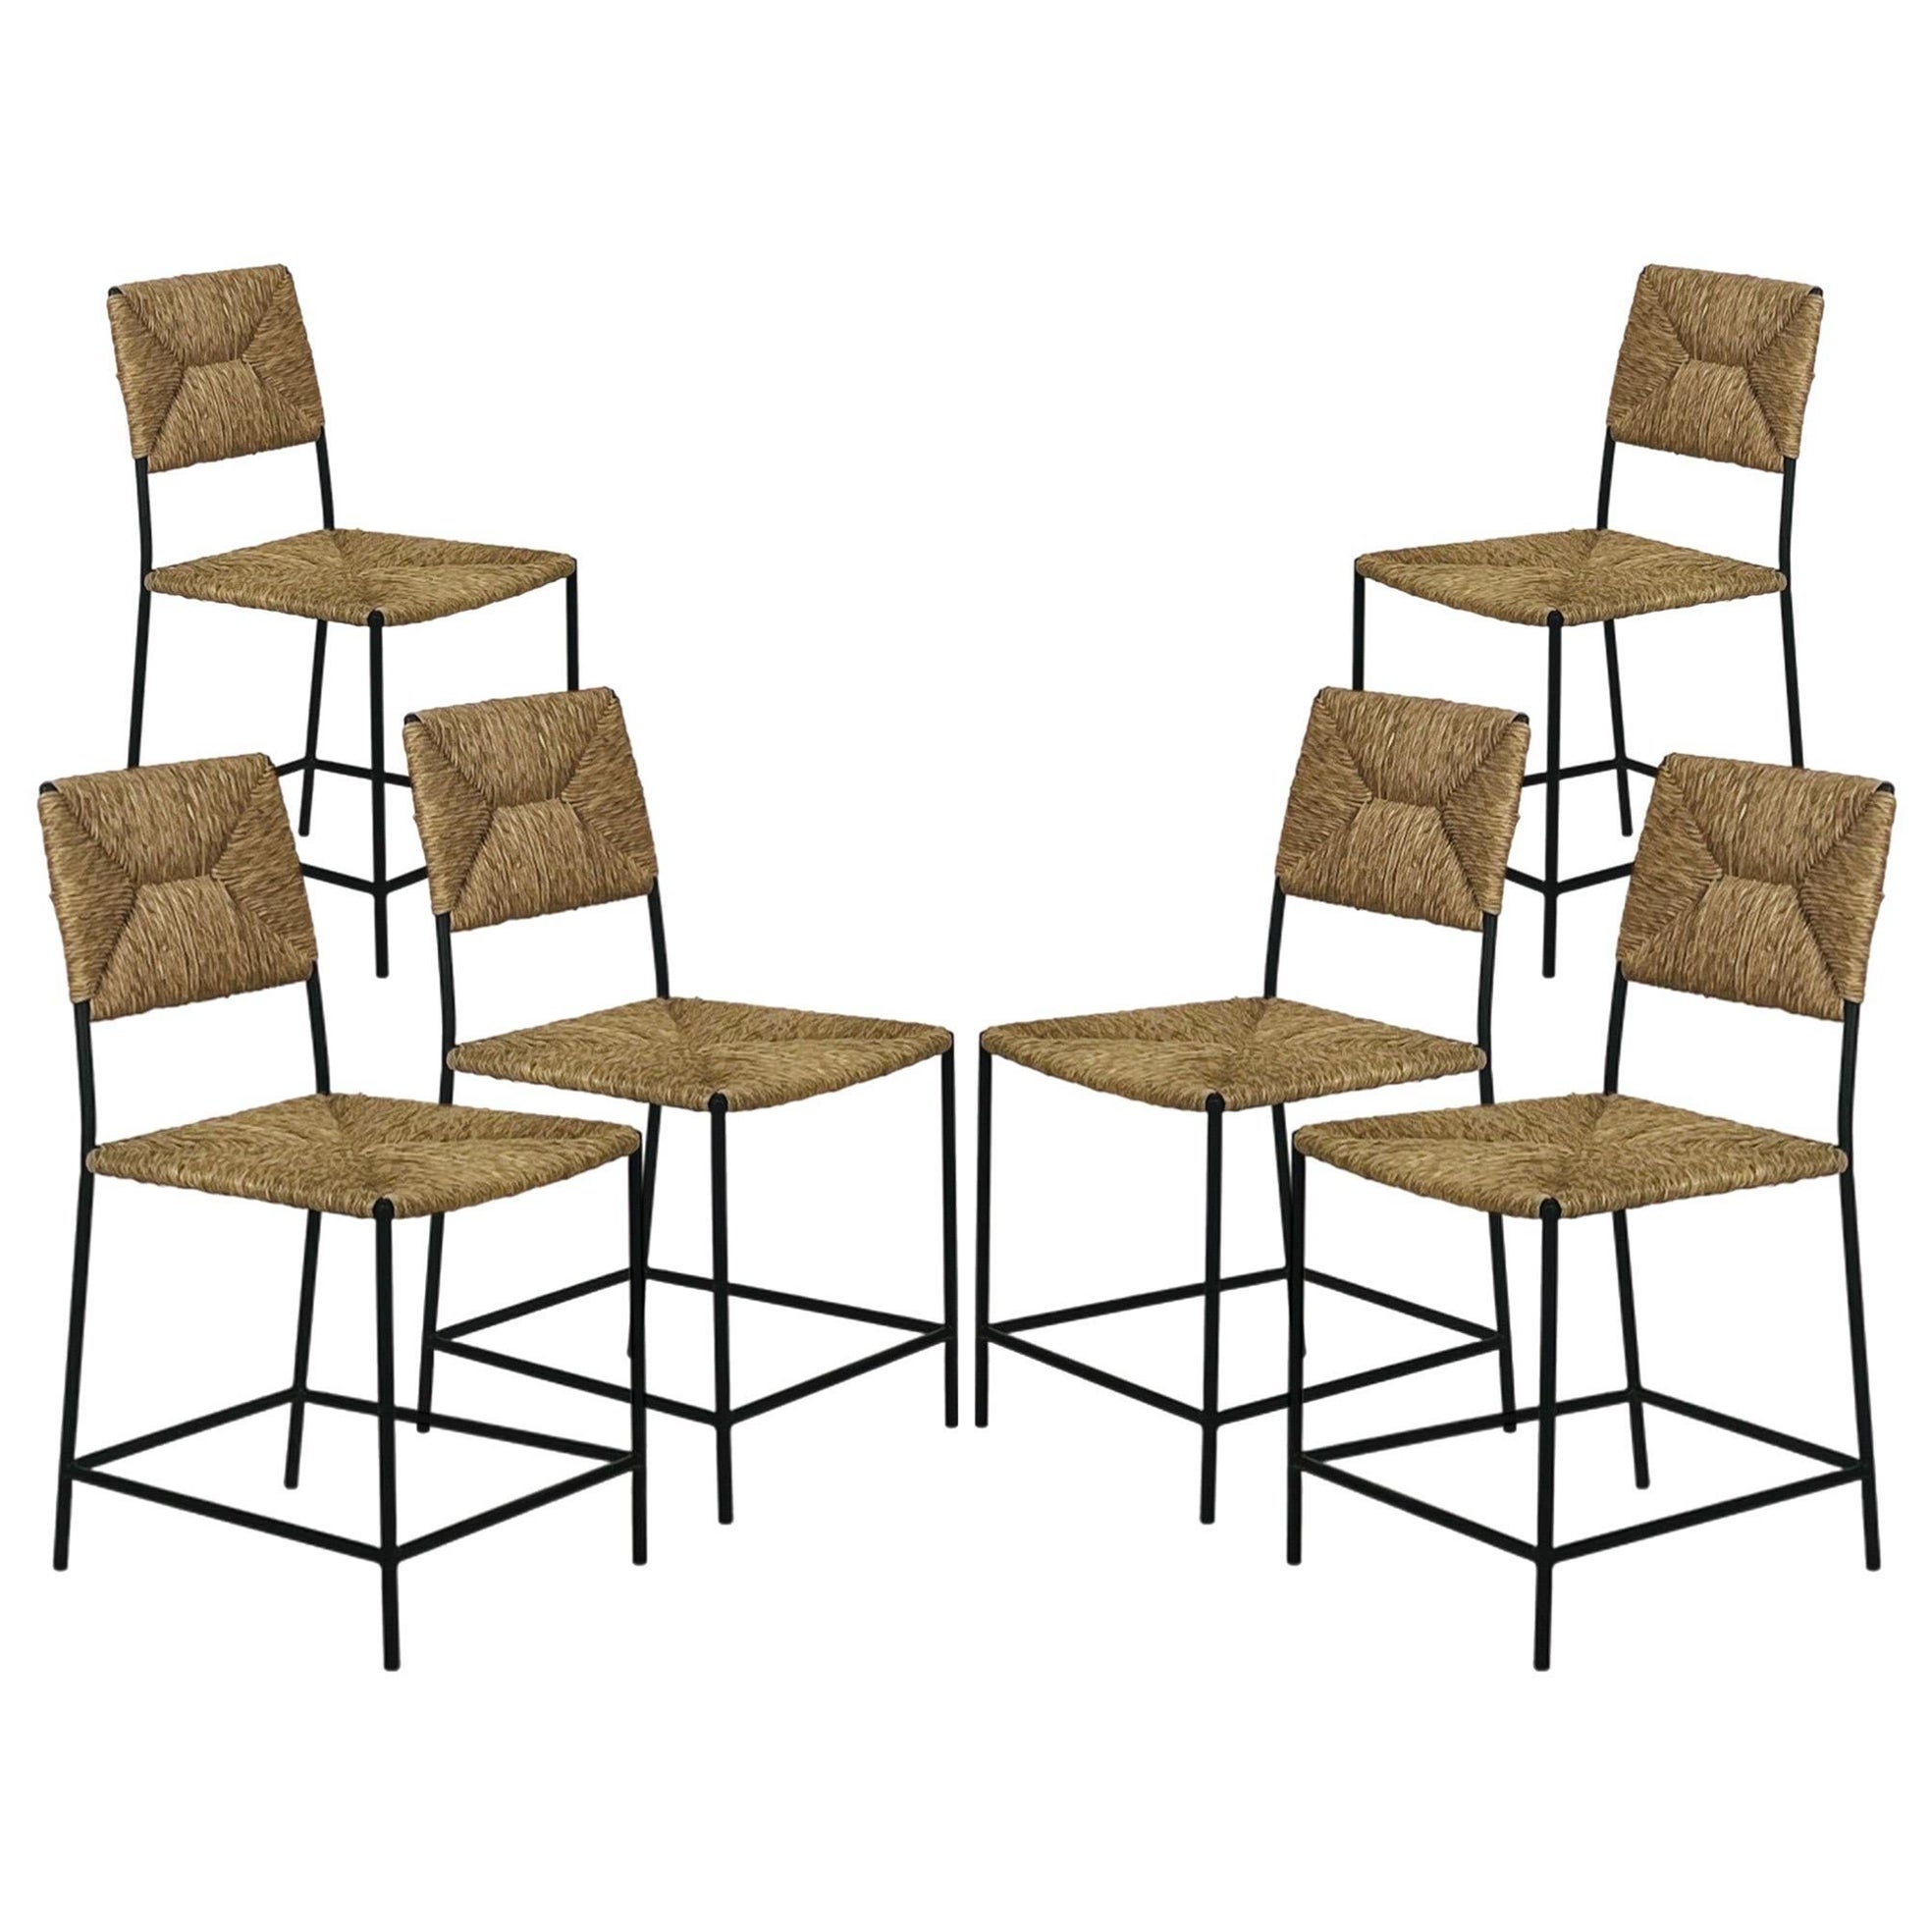 Set of 6 'Campagne' Dining Chairs by Design Frères For Sale